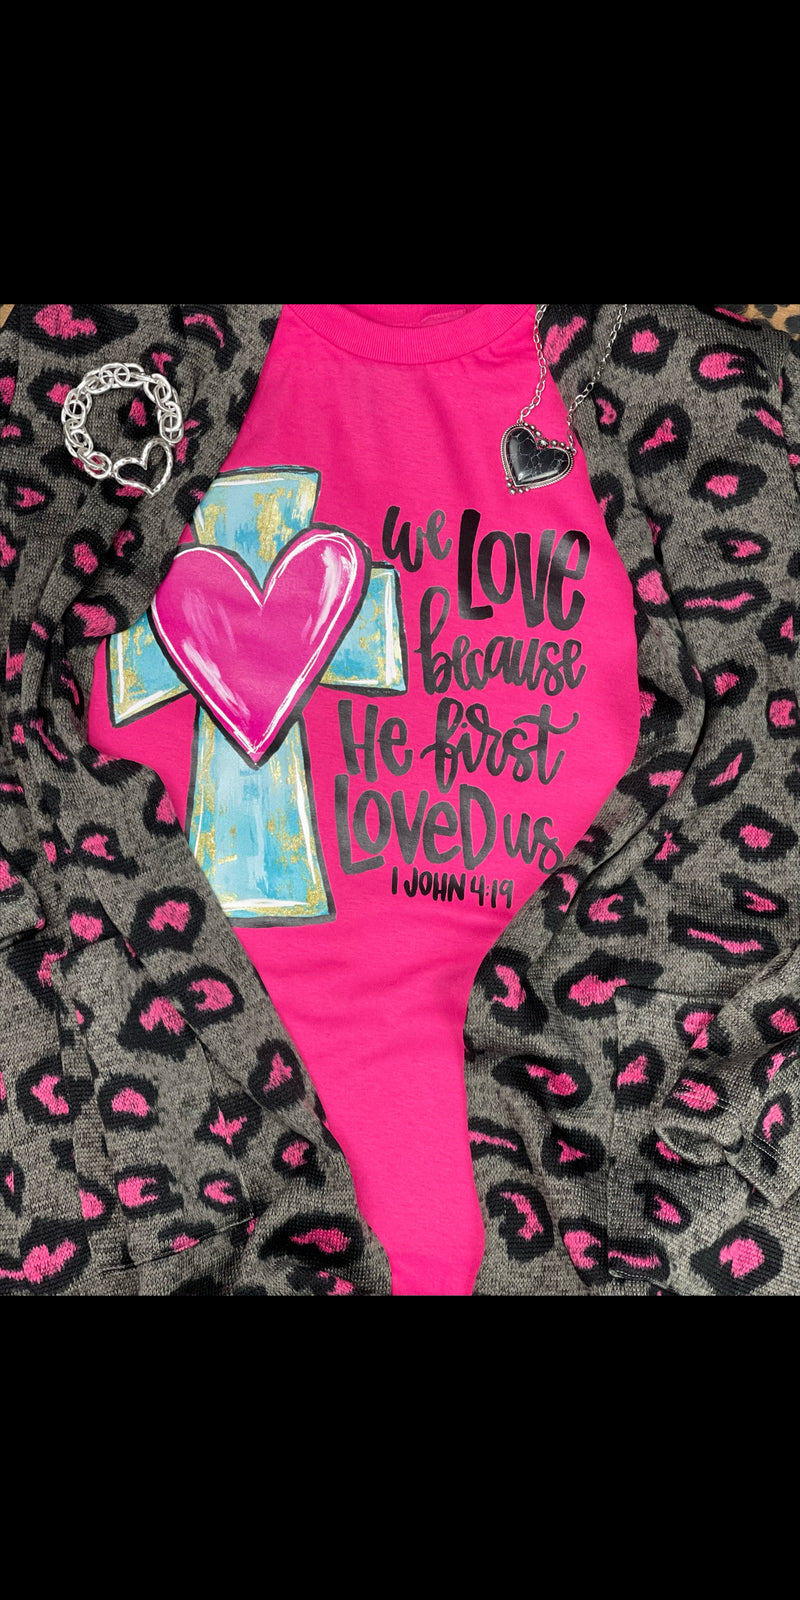 1 John 4:19 We Love Because He First Loved Us Tee - Also in Plus Size